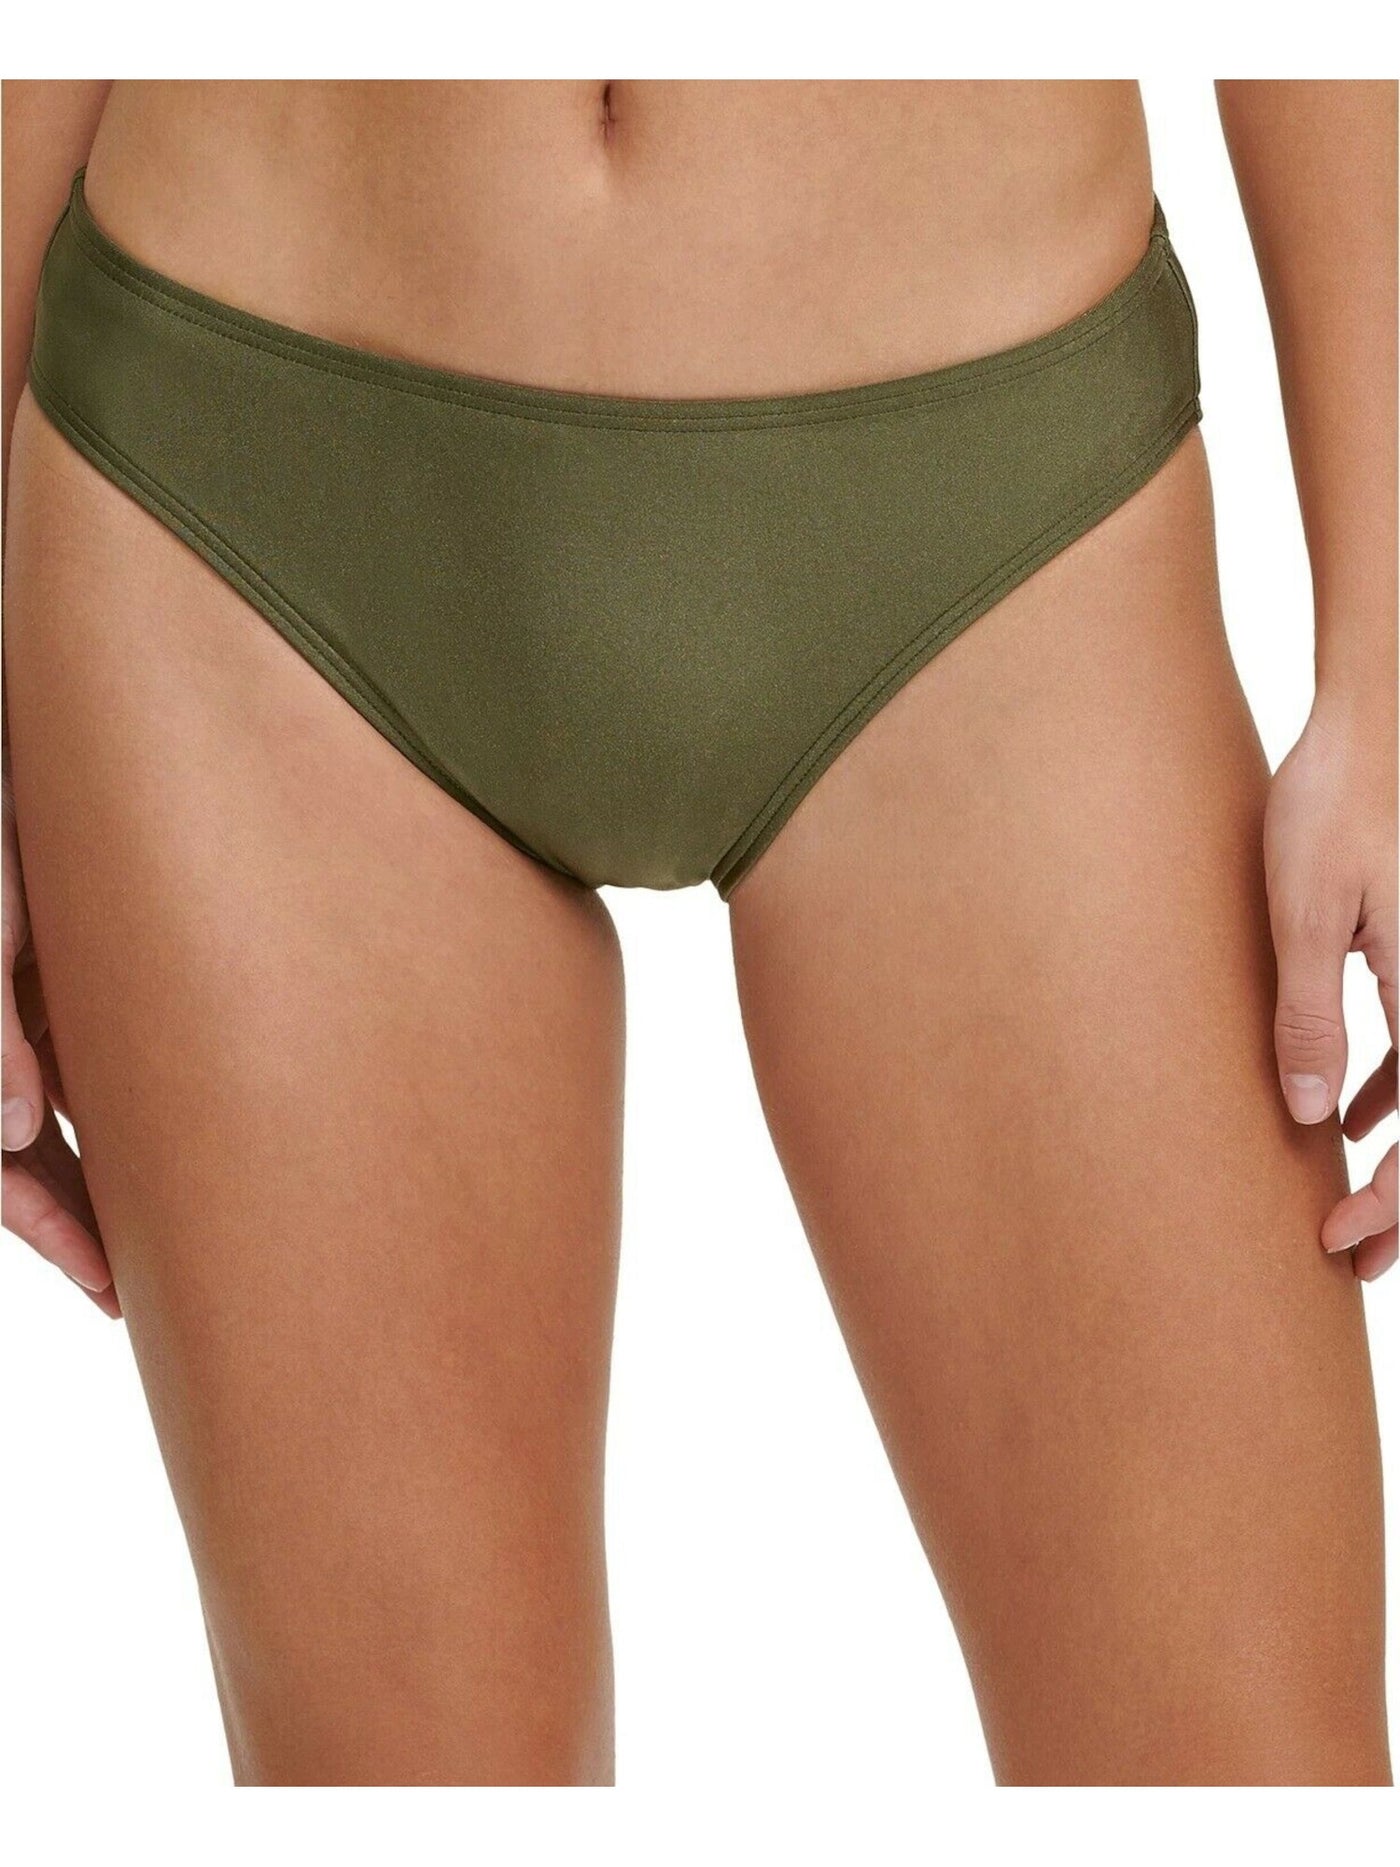 DKNY Women's Green Stretch Low-Rise Bikini Lined Full Coverage Classic Scoop Swimsuit Bottom XL